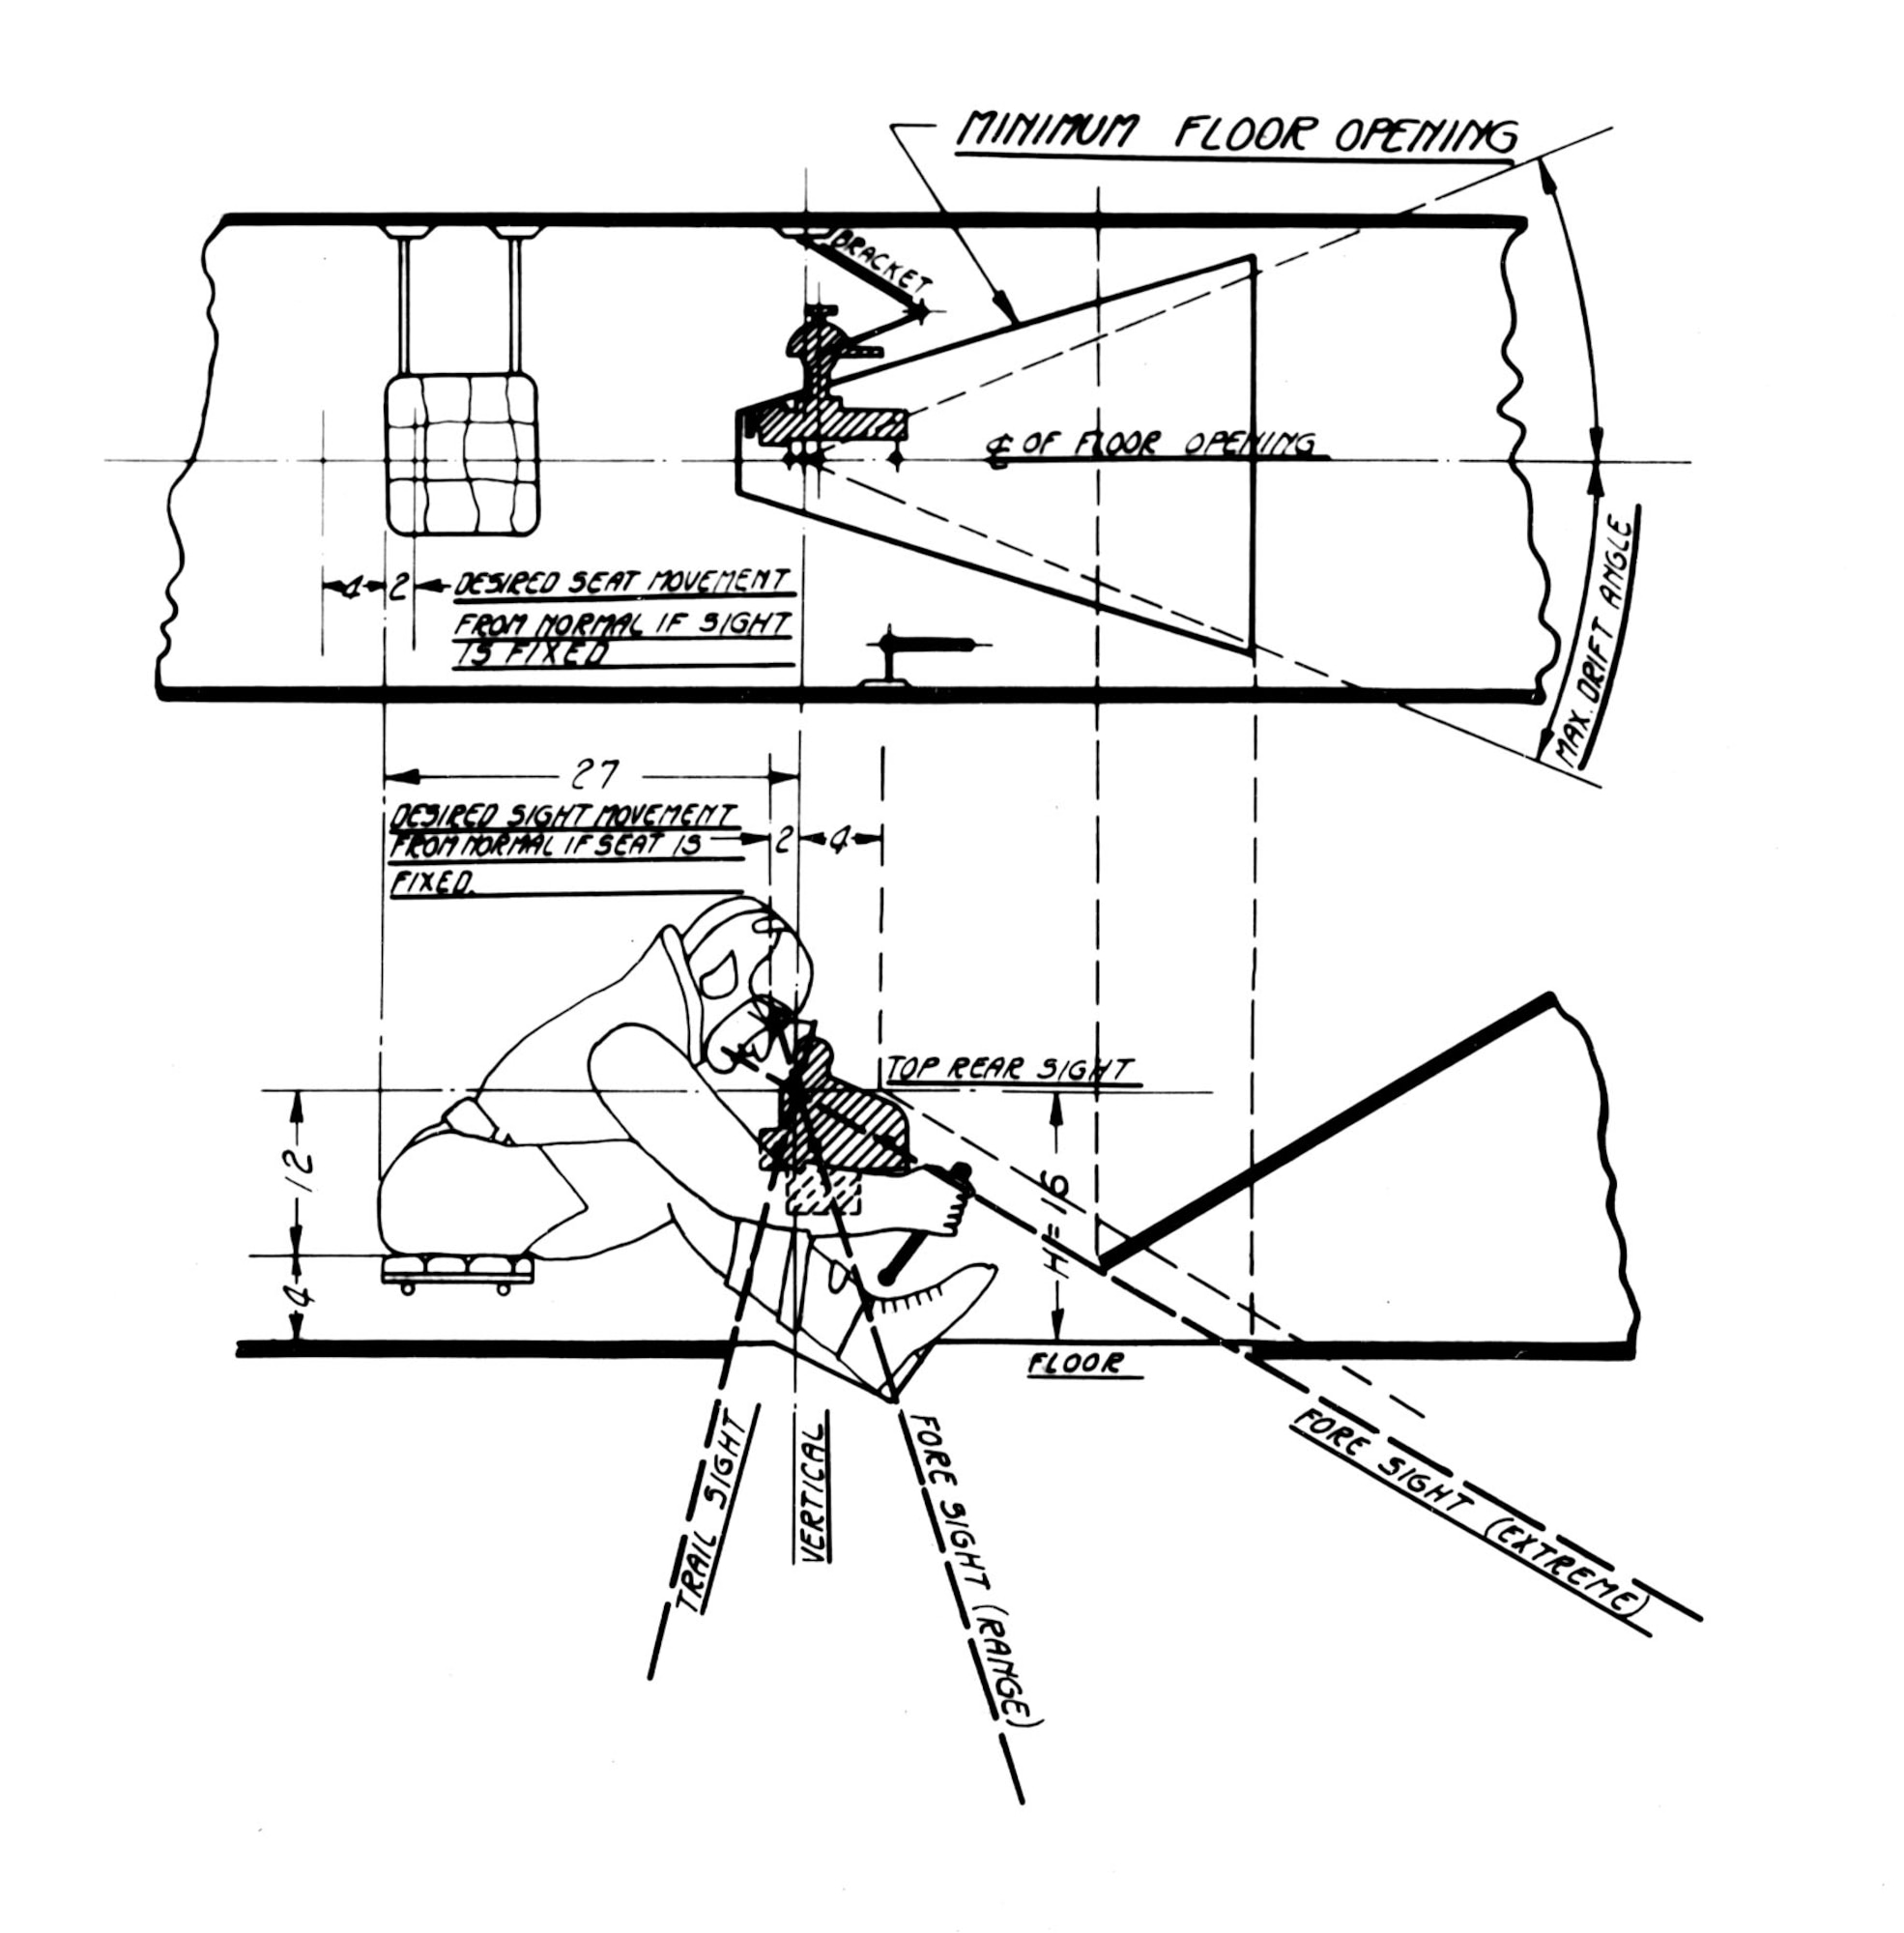 Illustration from a manual showing how the bombardier operated the D-1 bombsight. (U.S. Air Force photo)